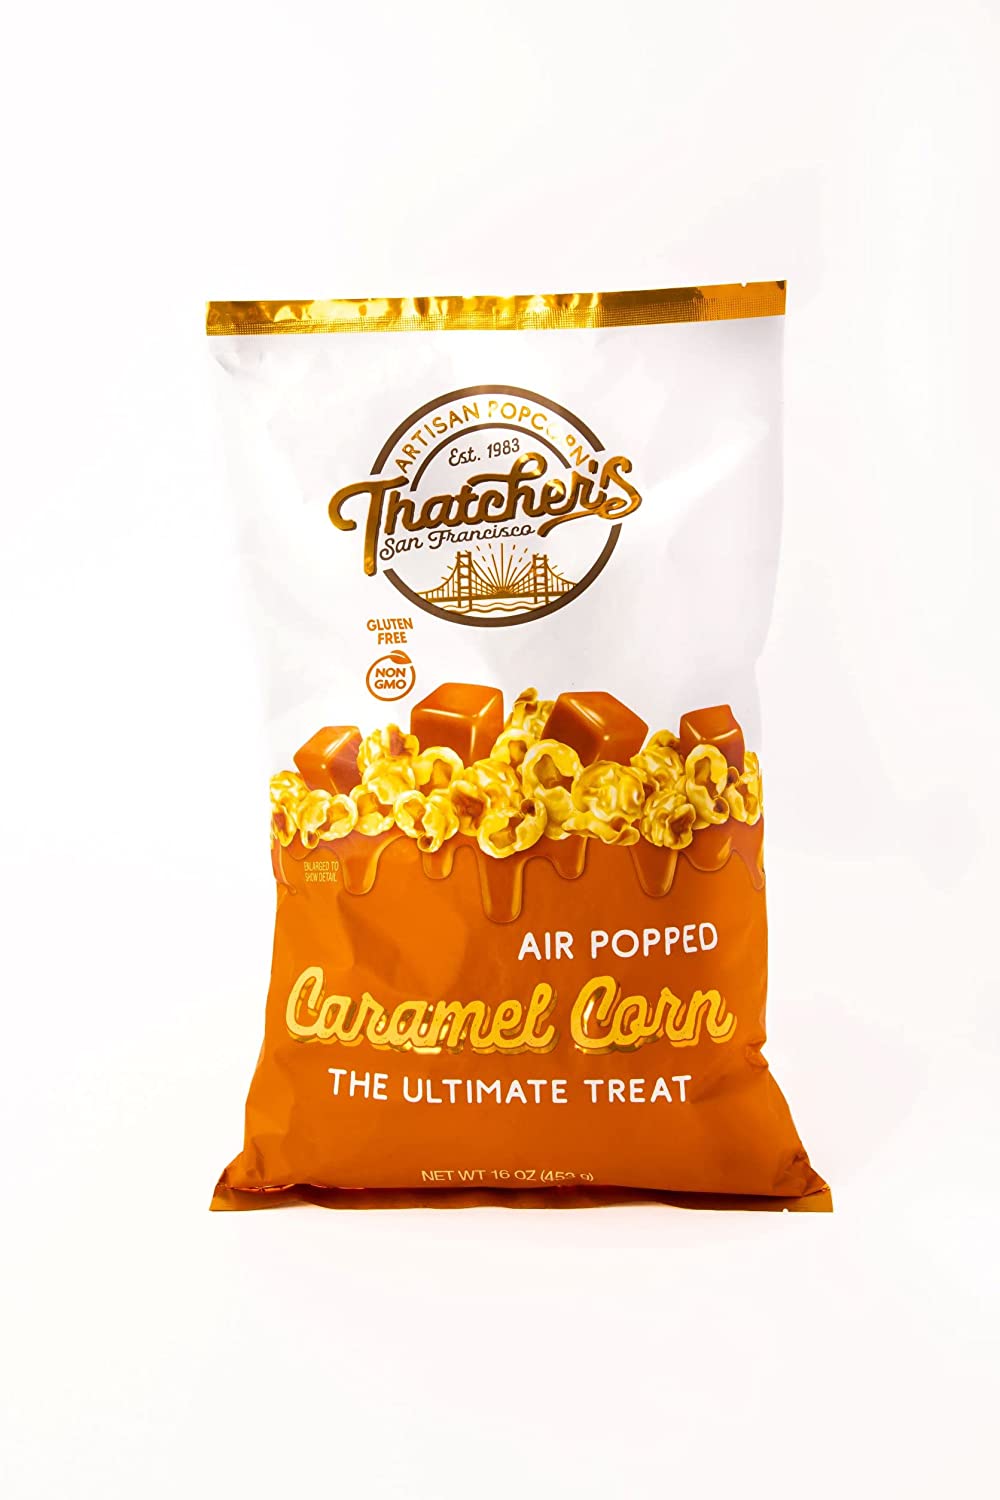 CARAMEL CORN LARGE POUCH GOURMET POPCORN 160Z (Pack of 6)